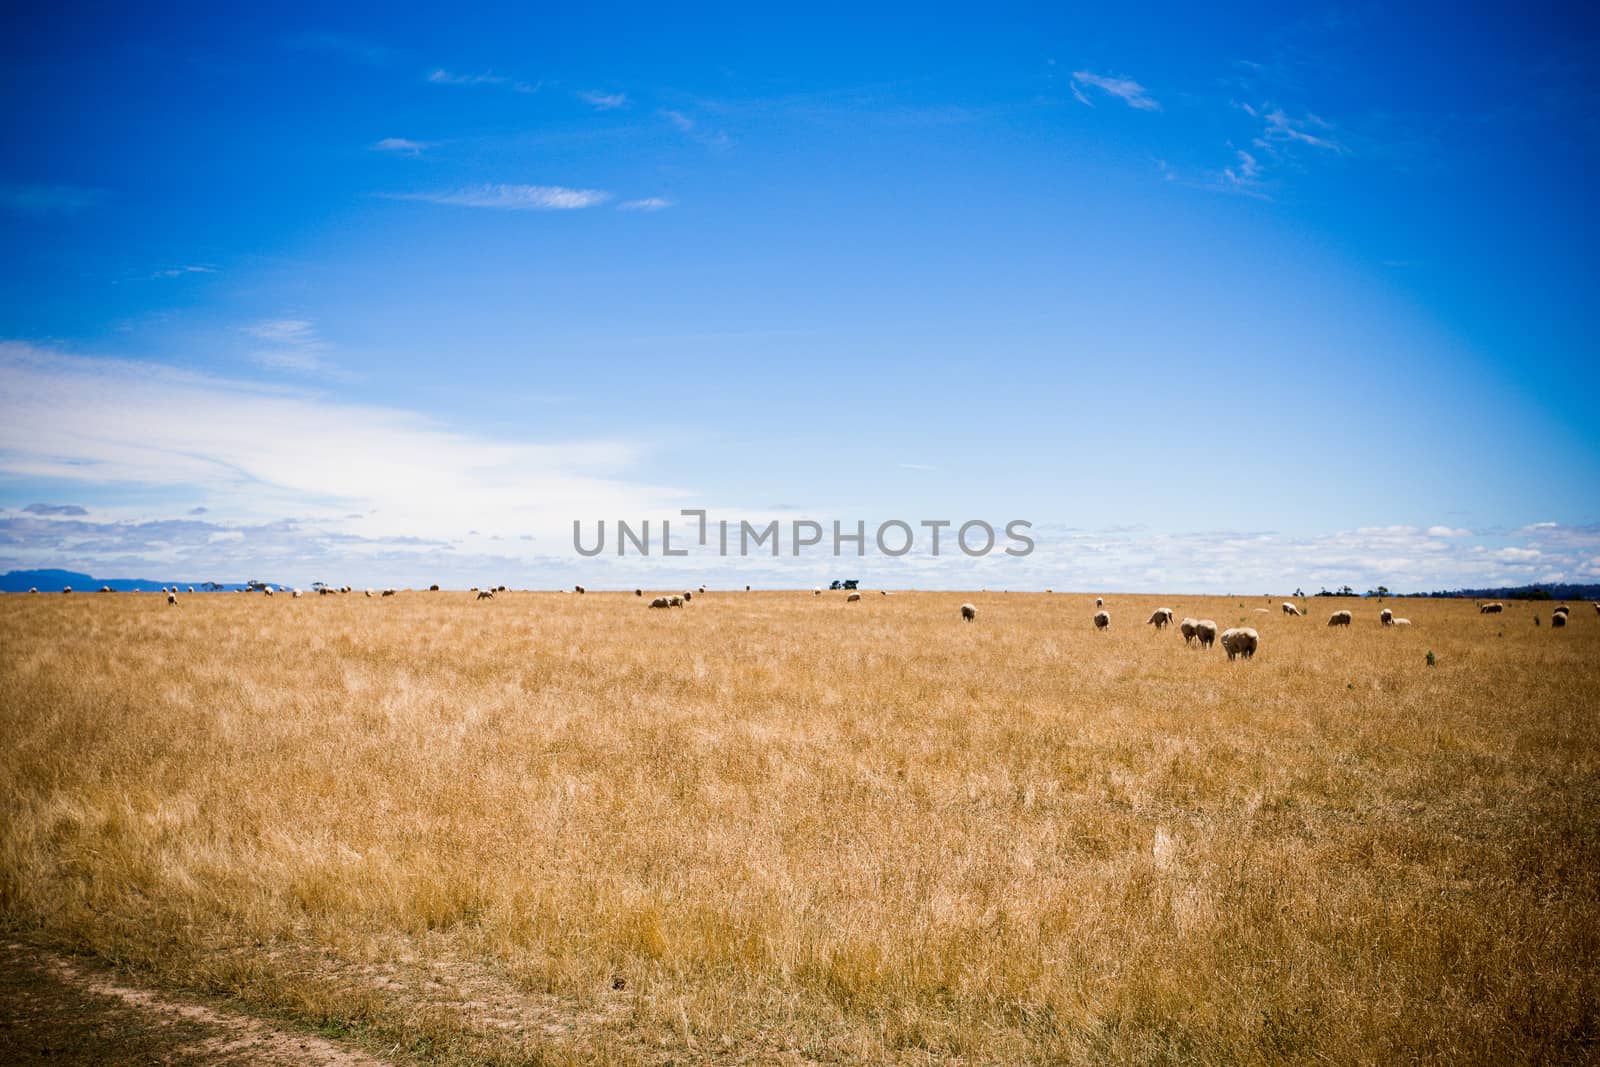 A herd of cows graze in a pasture over the clear blue sky